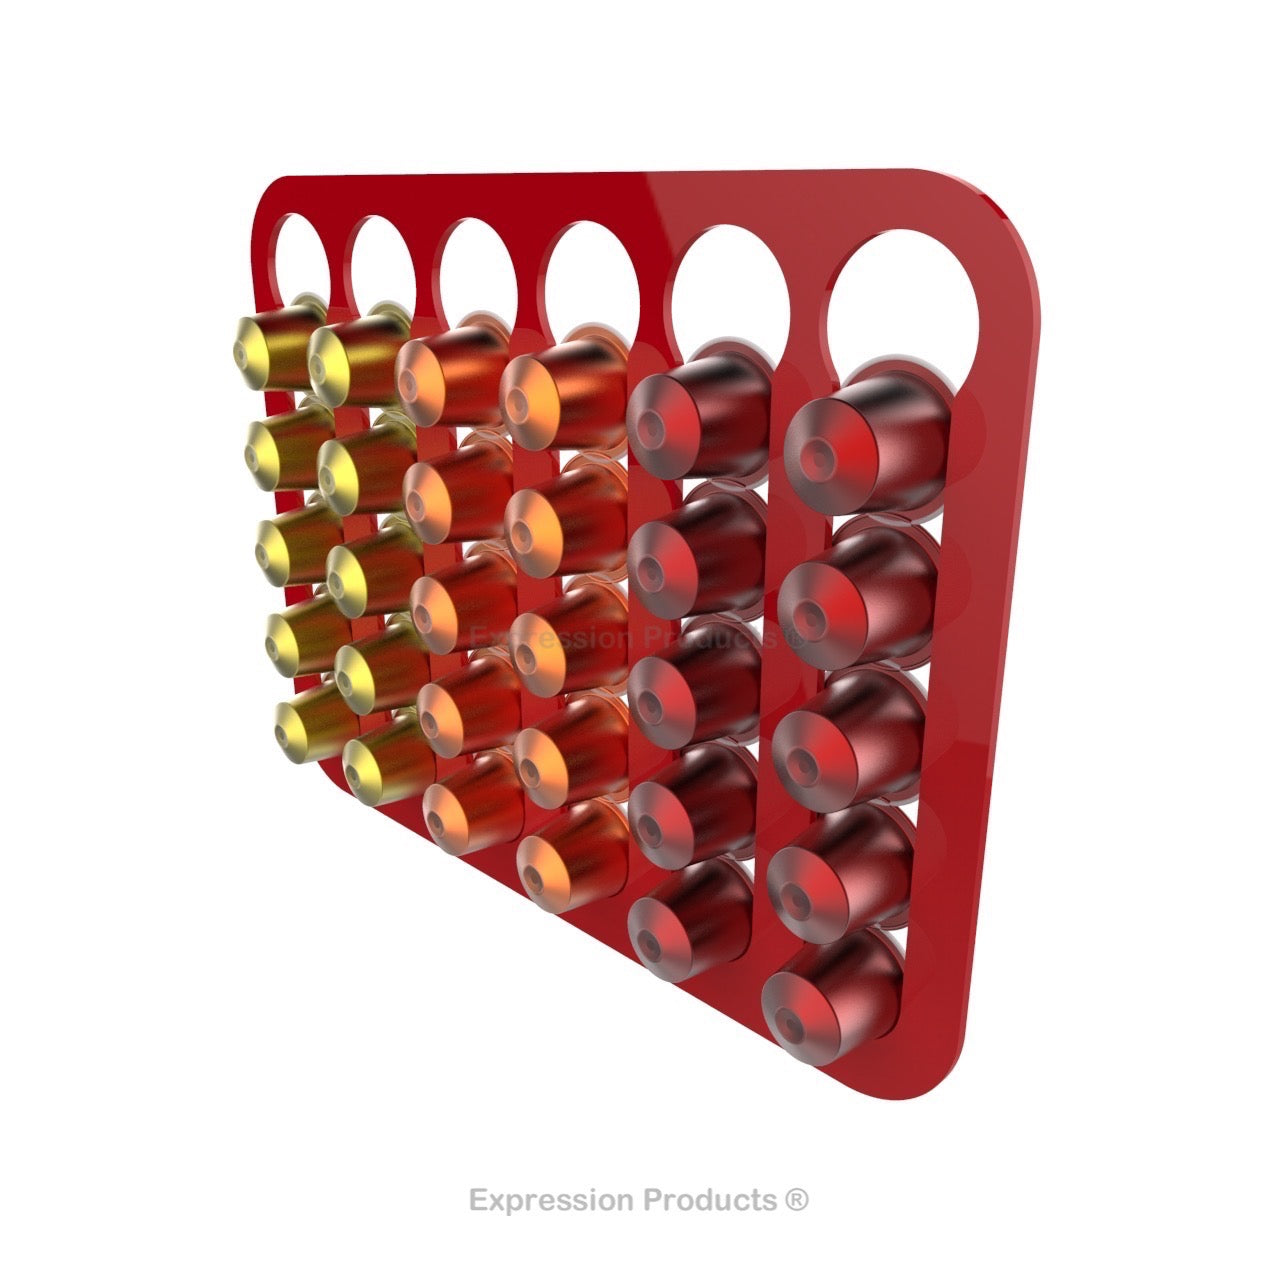 Magnetic Nespresso Original Line coffee pod holder shown in red holding 30 pods